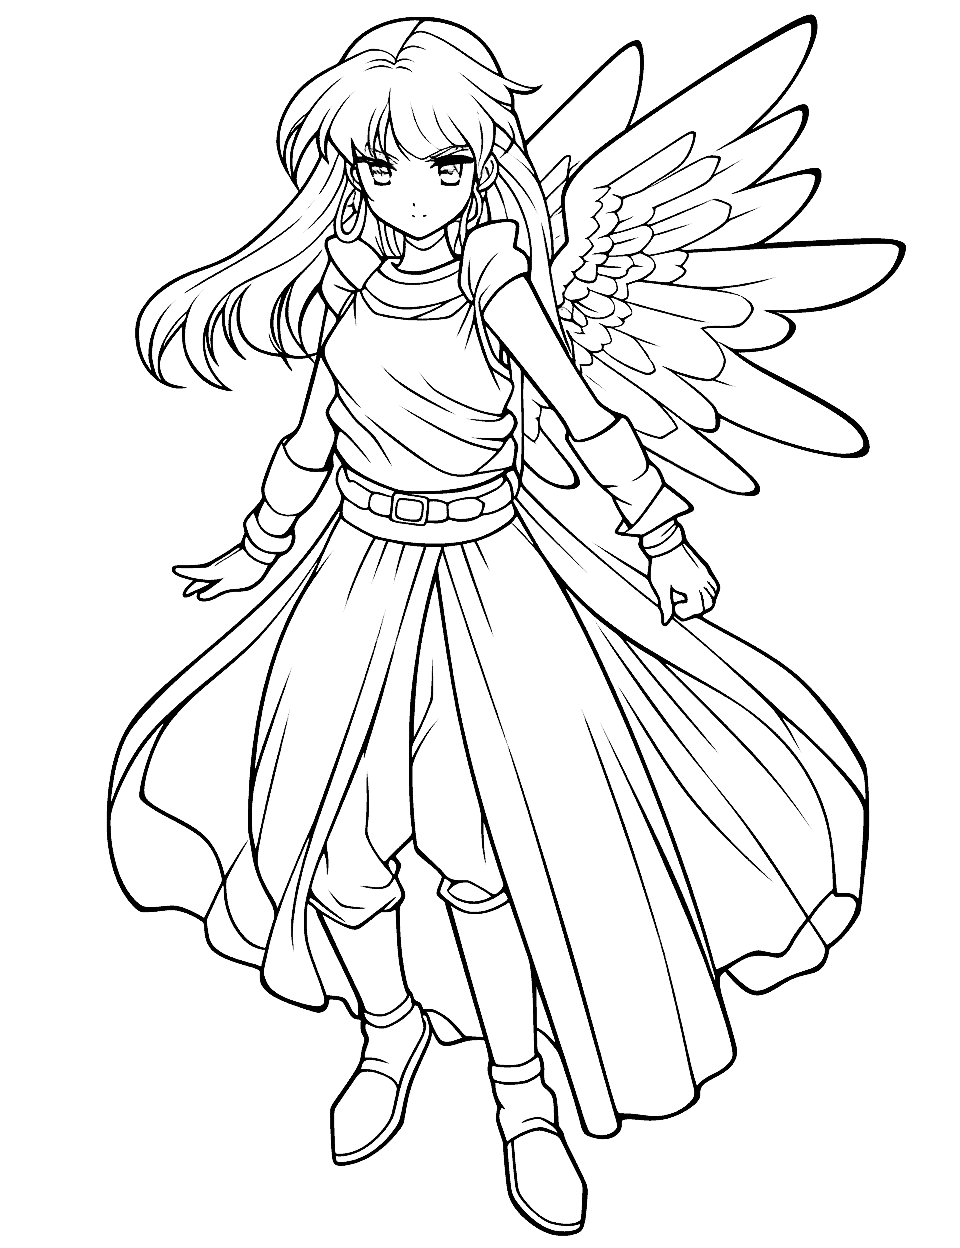 Beautiful Anime Angel Coloring Page - A beautiful anime angel with flowing hair and dress, descending from the heavens.